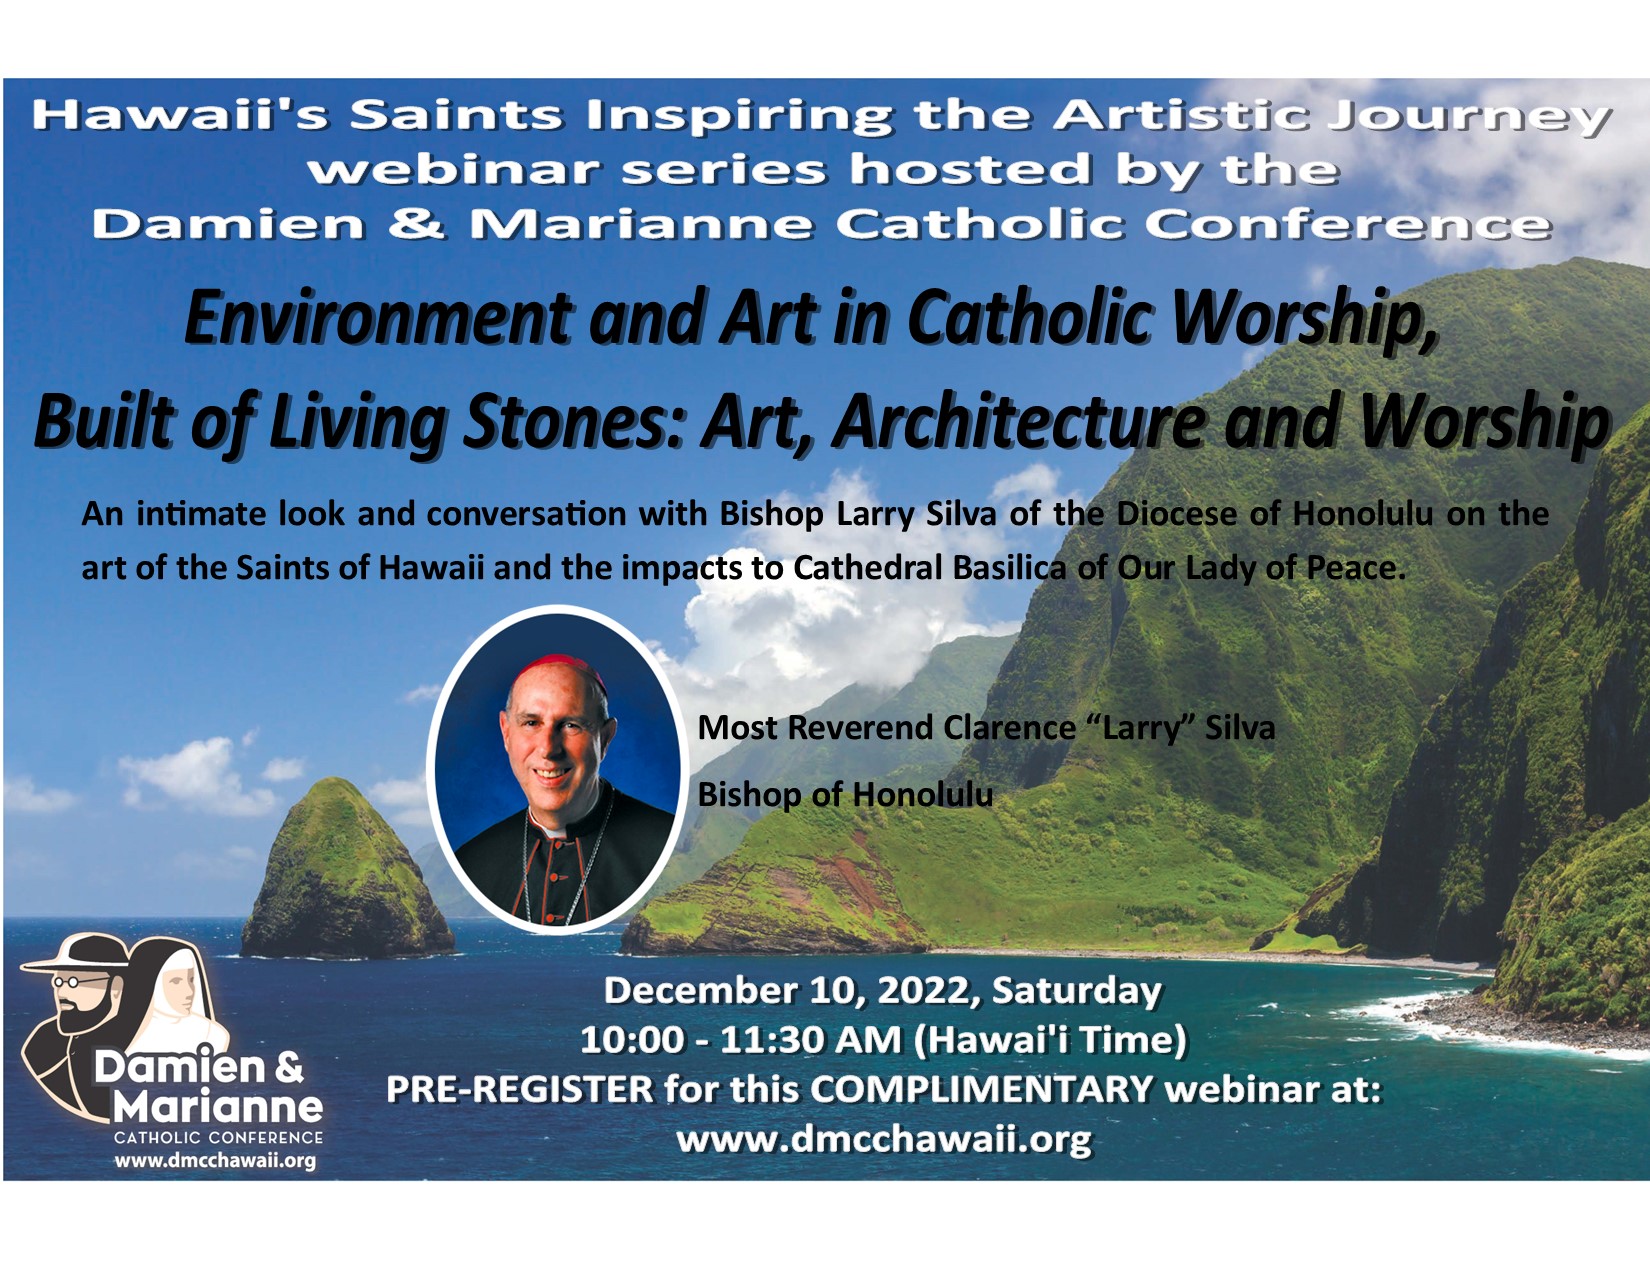 Environment and Art in Catholic Worship, Built of Living Stones: Art, Architecture and Worship